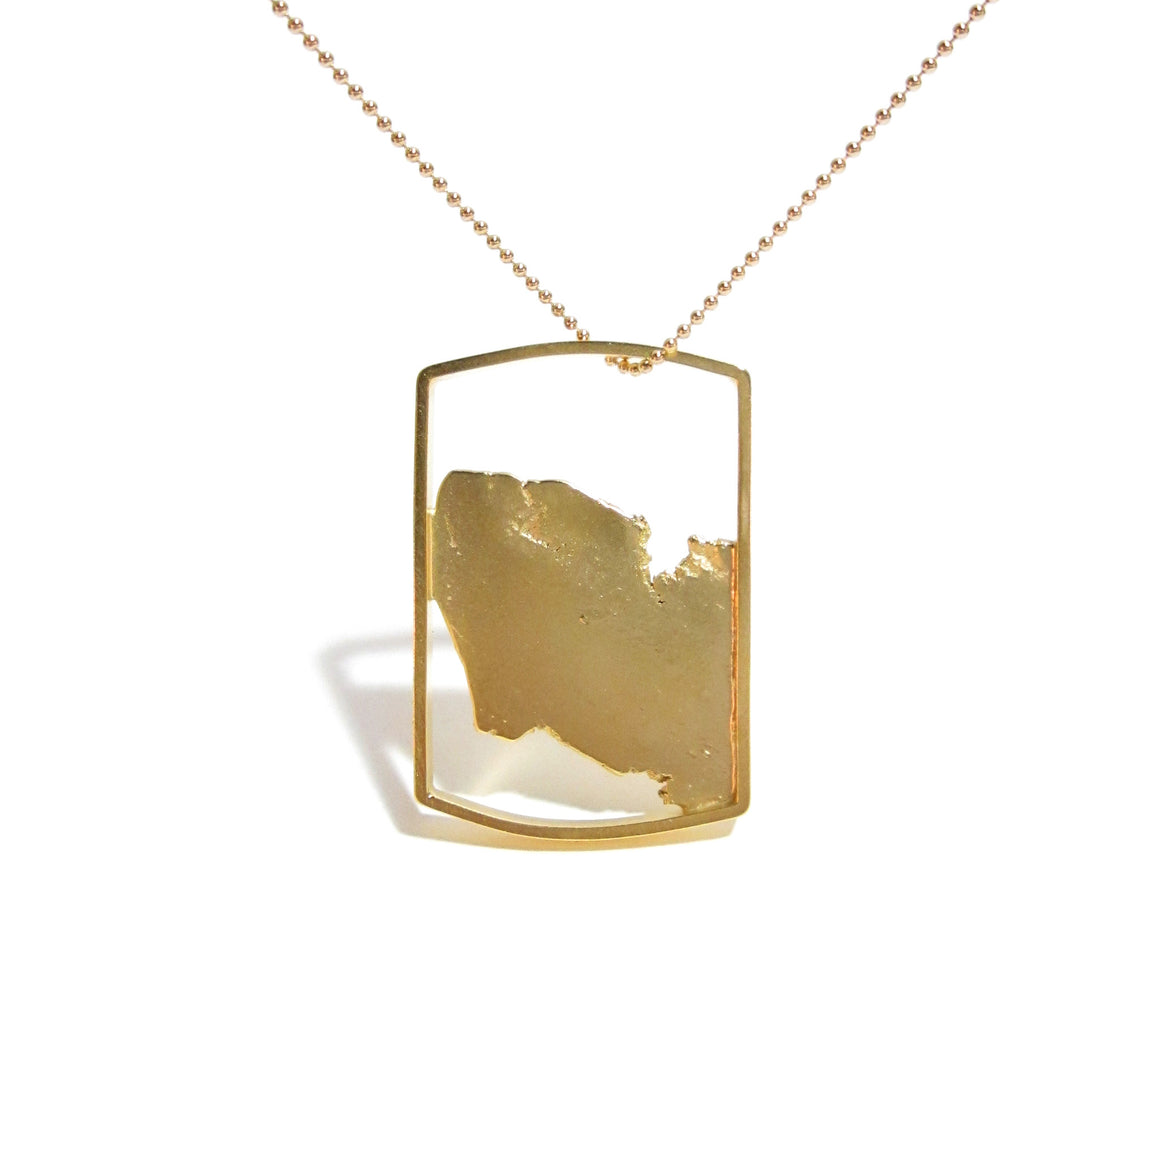 18K gold plated sterling silver tag by Seth Papac